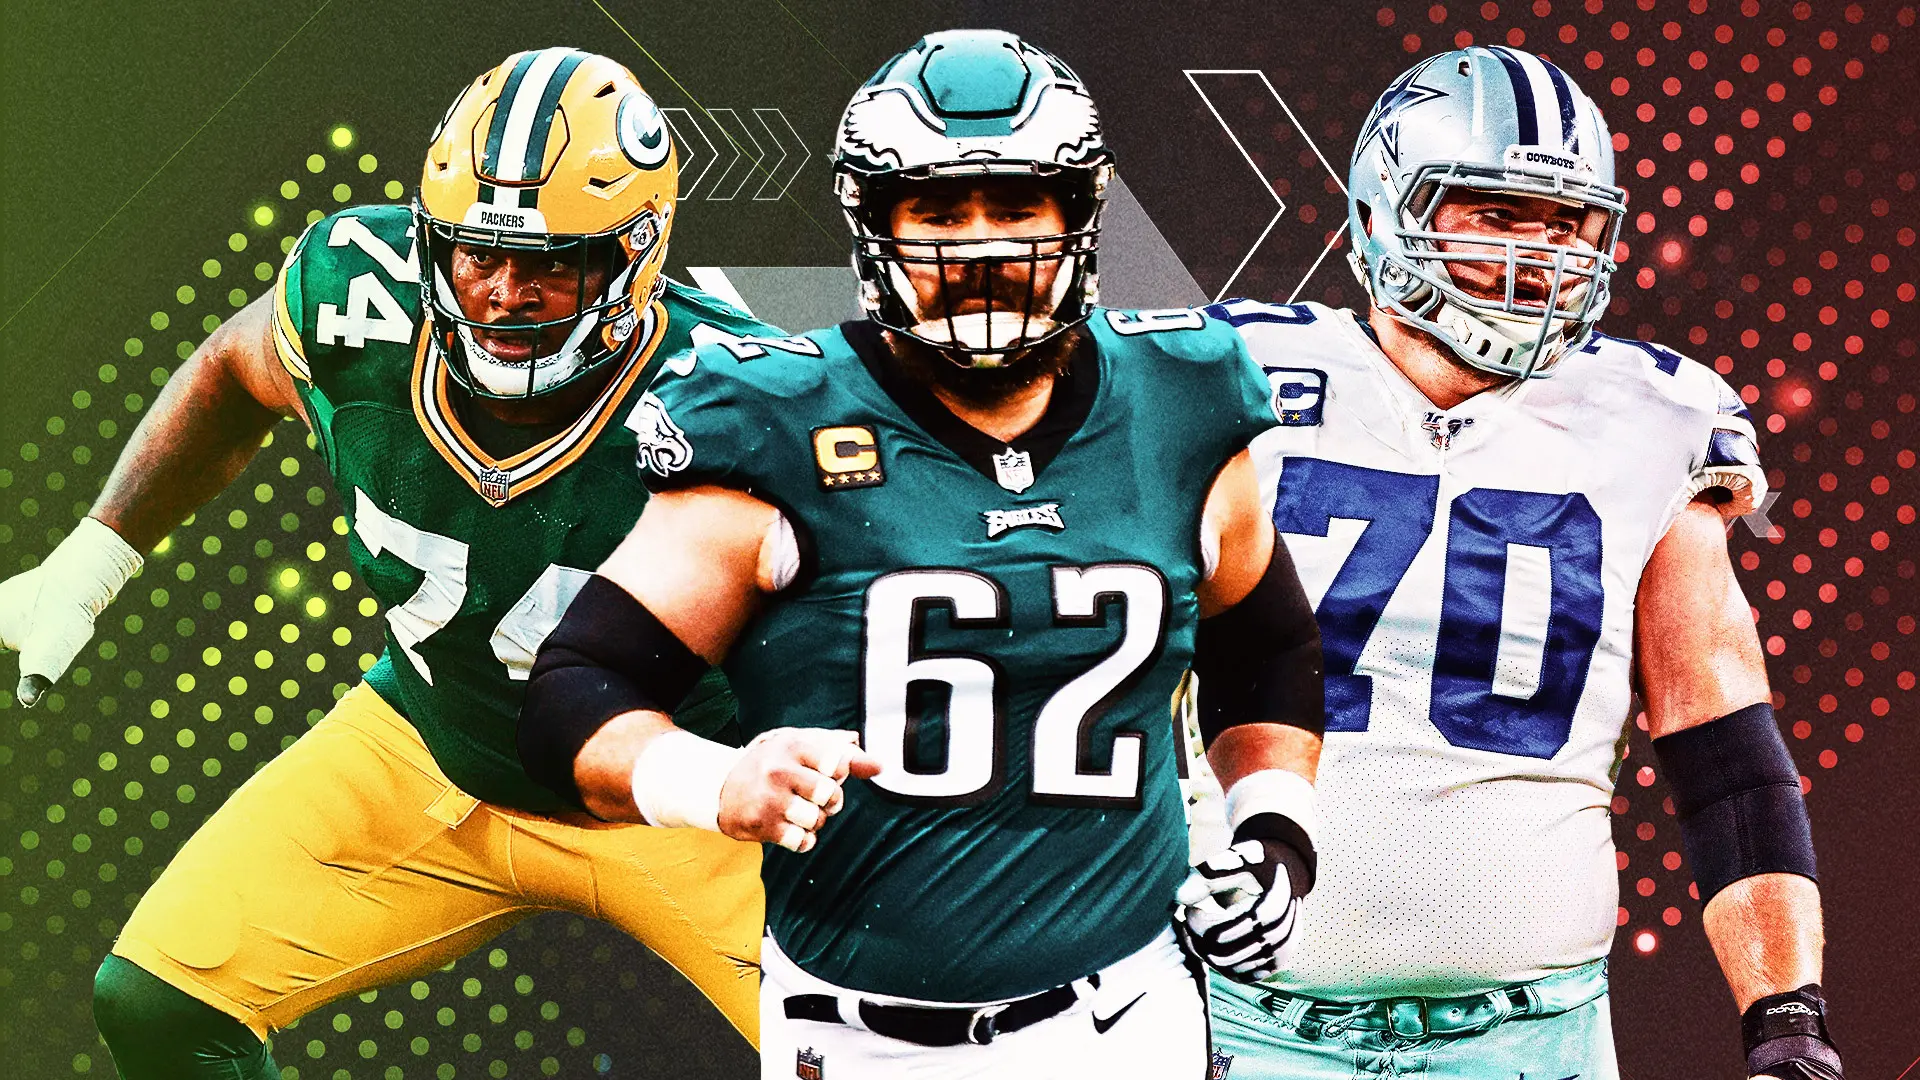 PFF names the Eagles' offensive line as the best of 2017